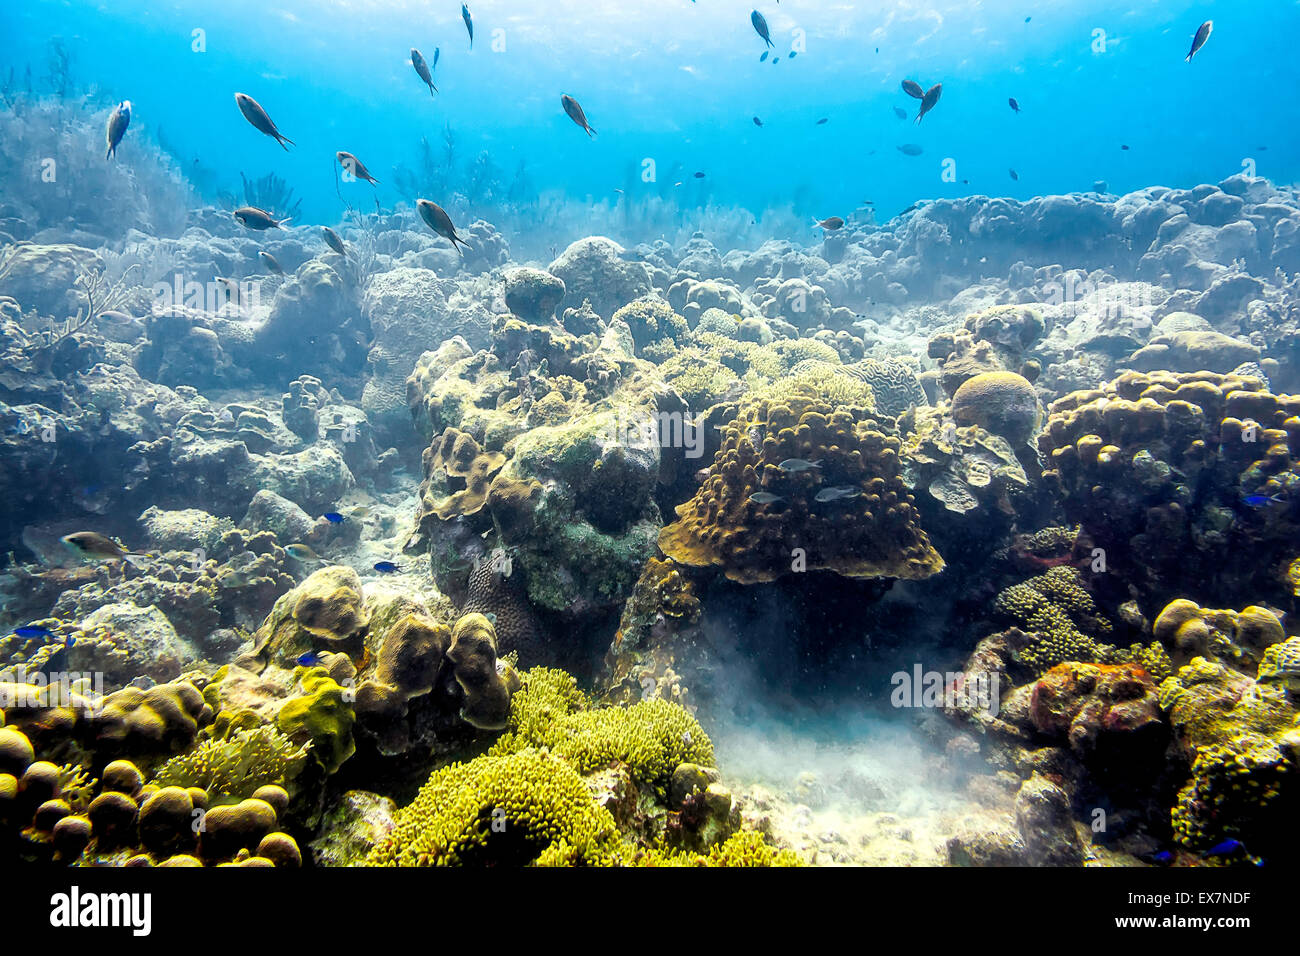 Fish, Corals Sponges coexisting together at the Knife site in Klein Bonaire, Bonaire Stock Photo